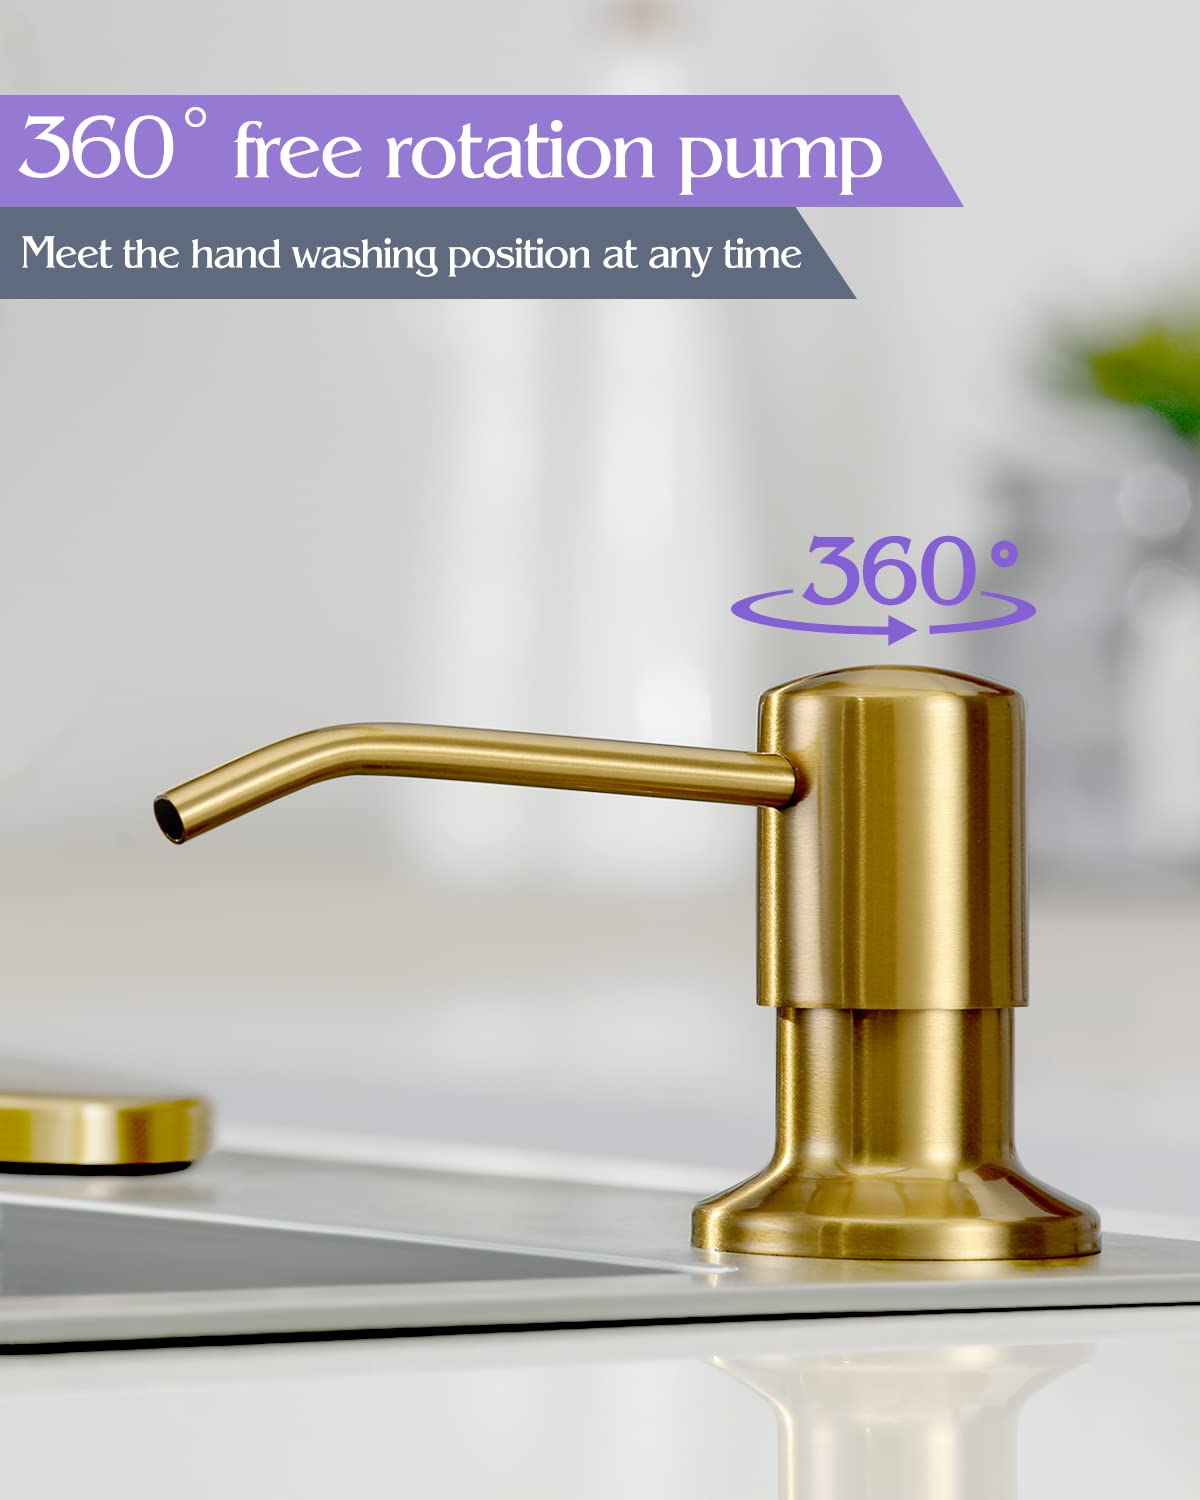 Hoanmpy Soap Dispenser for Kitchen Sink Brushed Gold, Built in Stainless Steel Kitchen Soap Dispenser, Refill from The Top,in Counter Kitchen Sink Soap Dispenser,17 oz